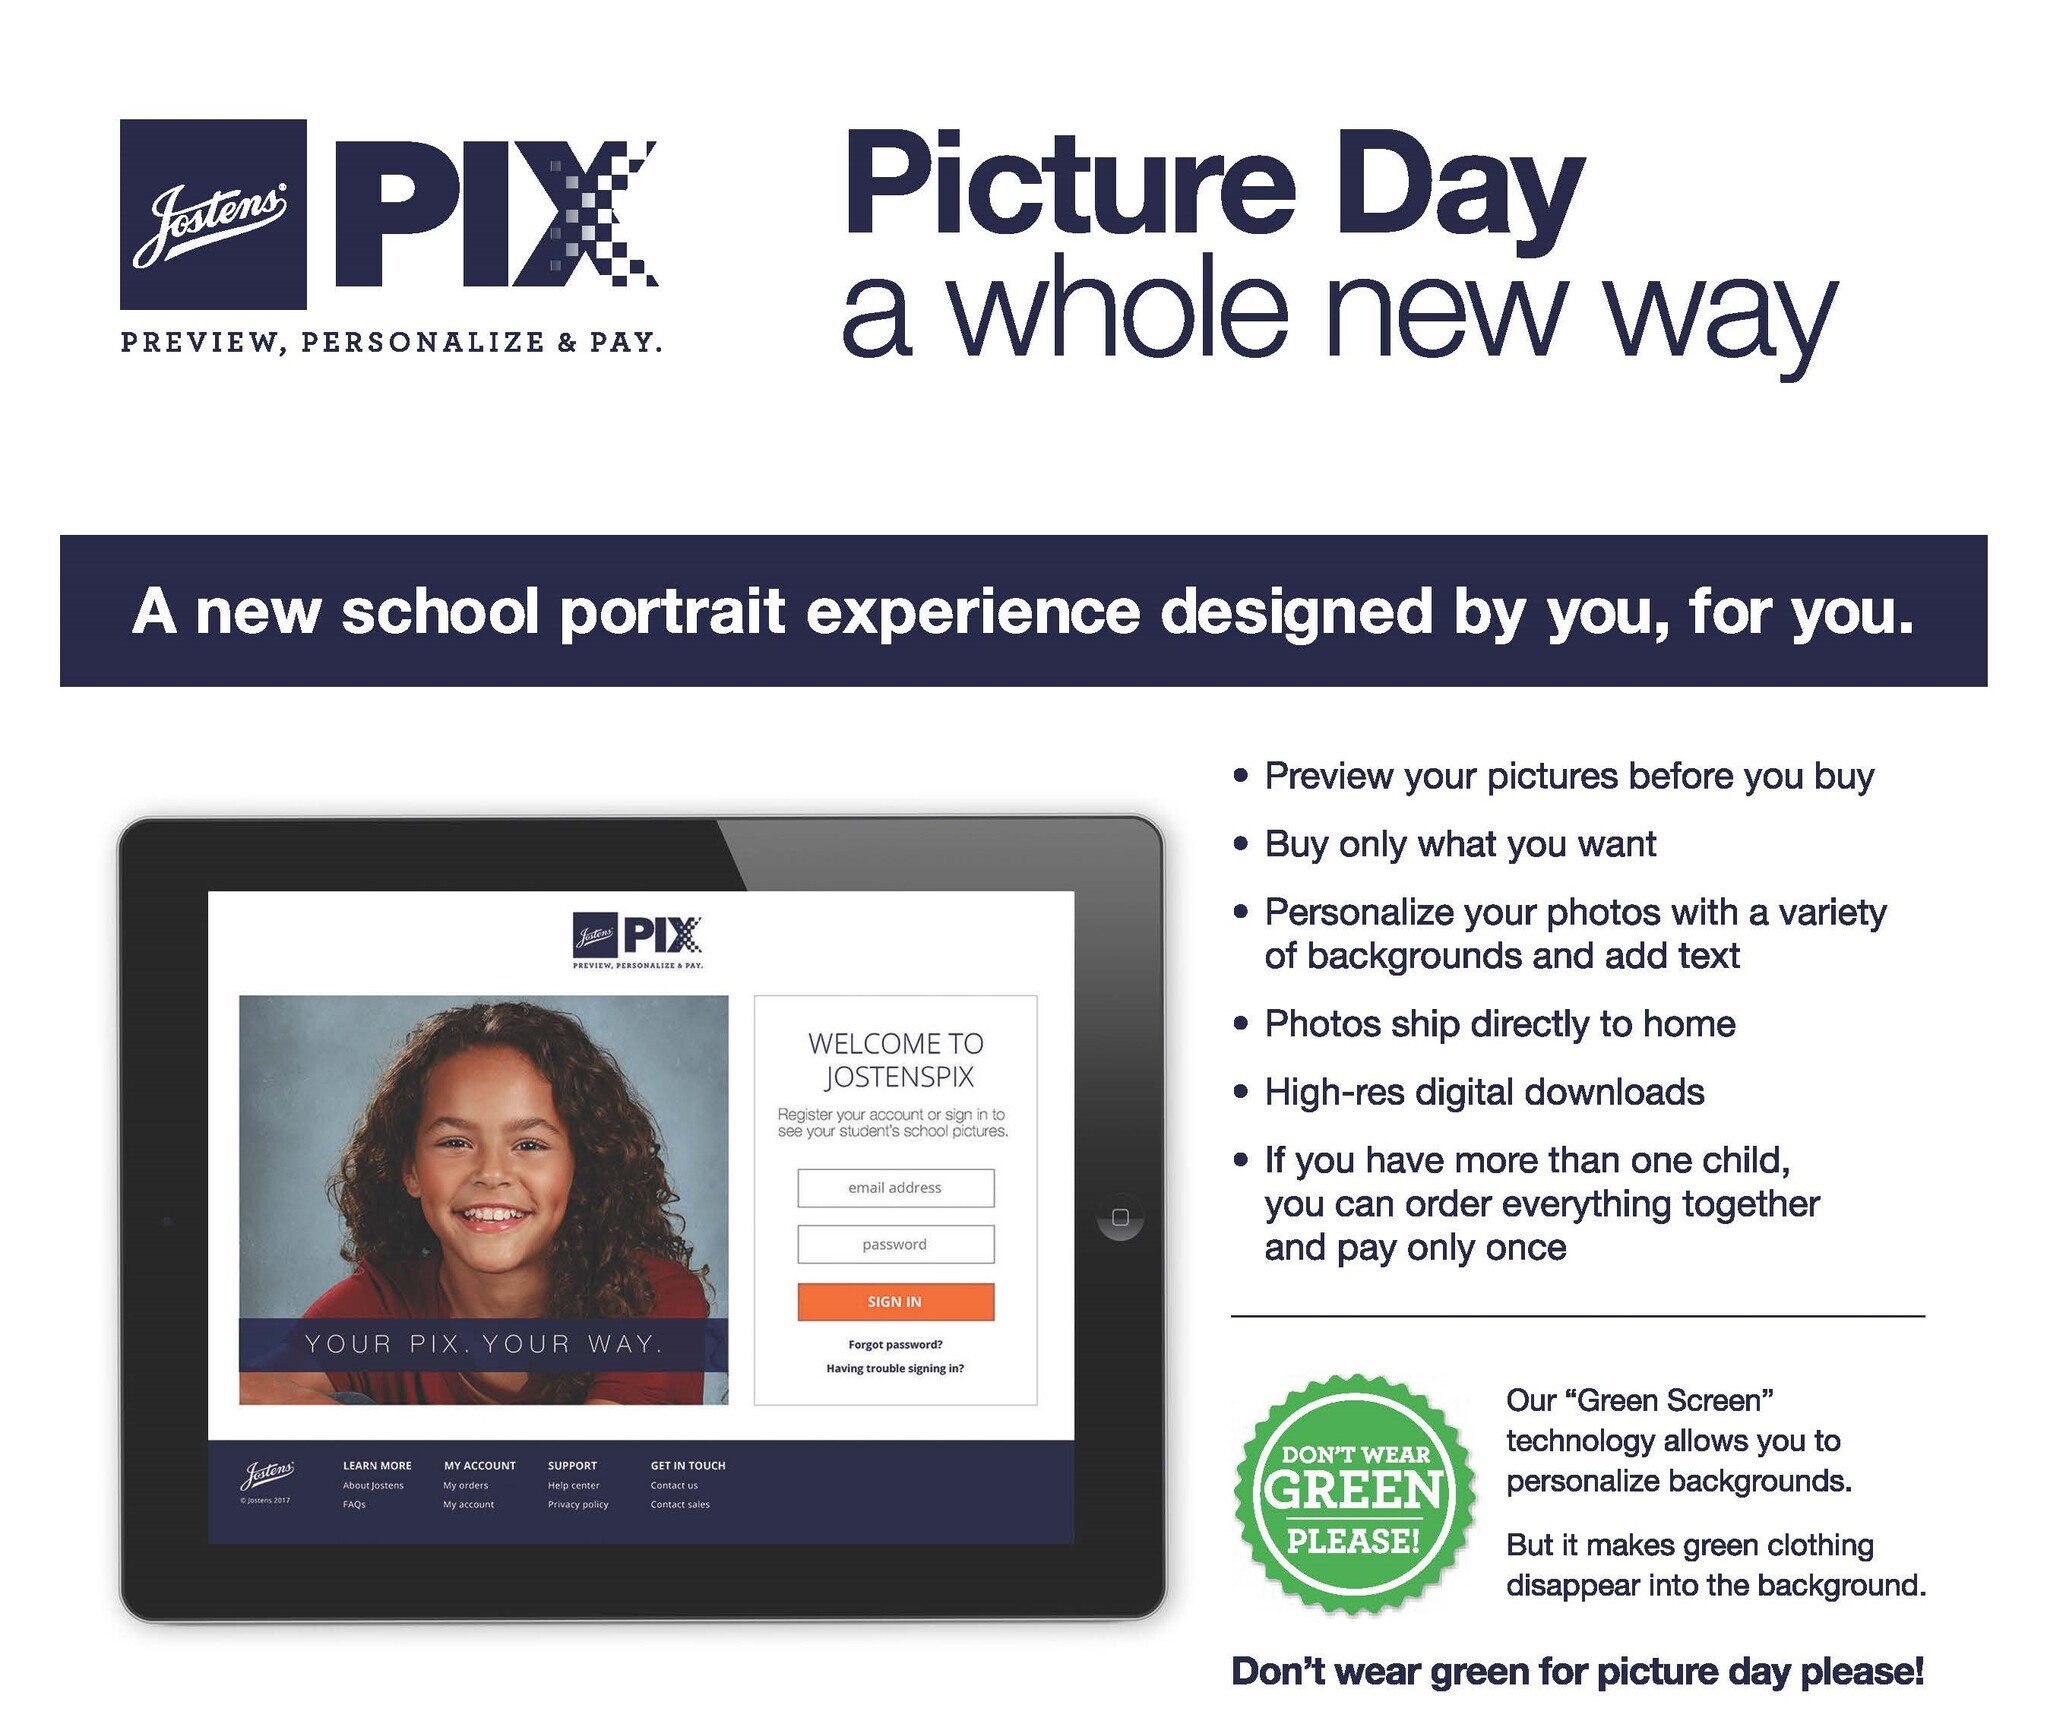 Jostens - Picture Day A Whole New Way